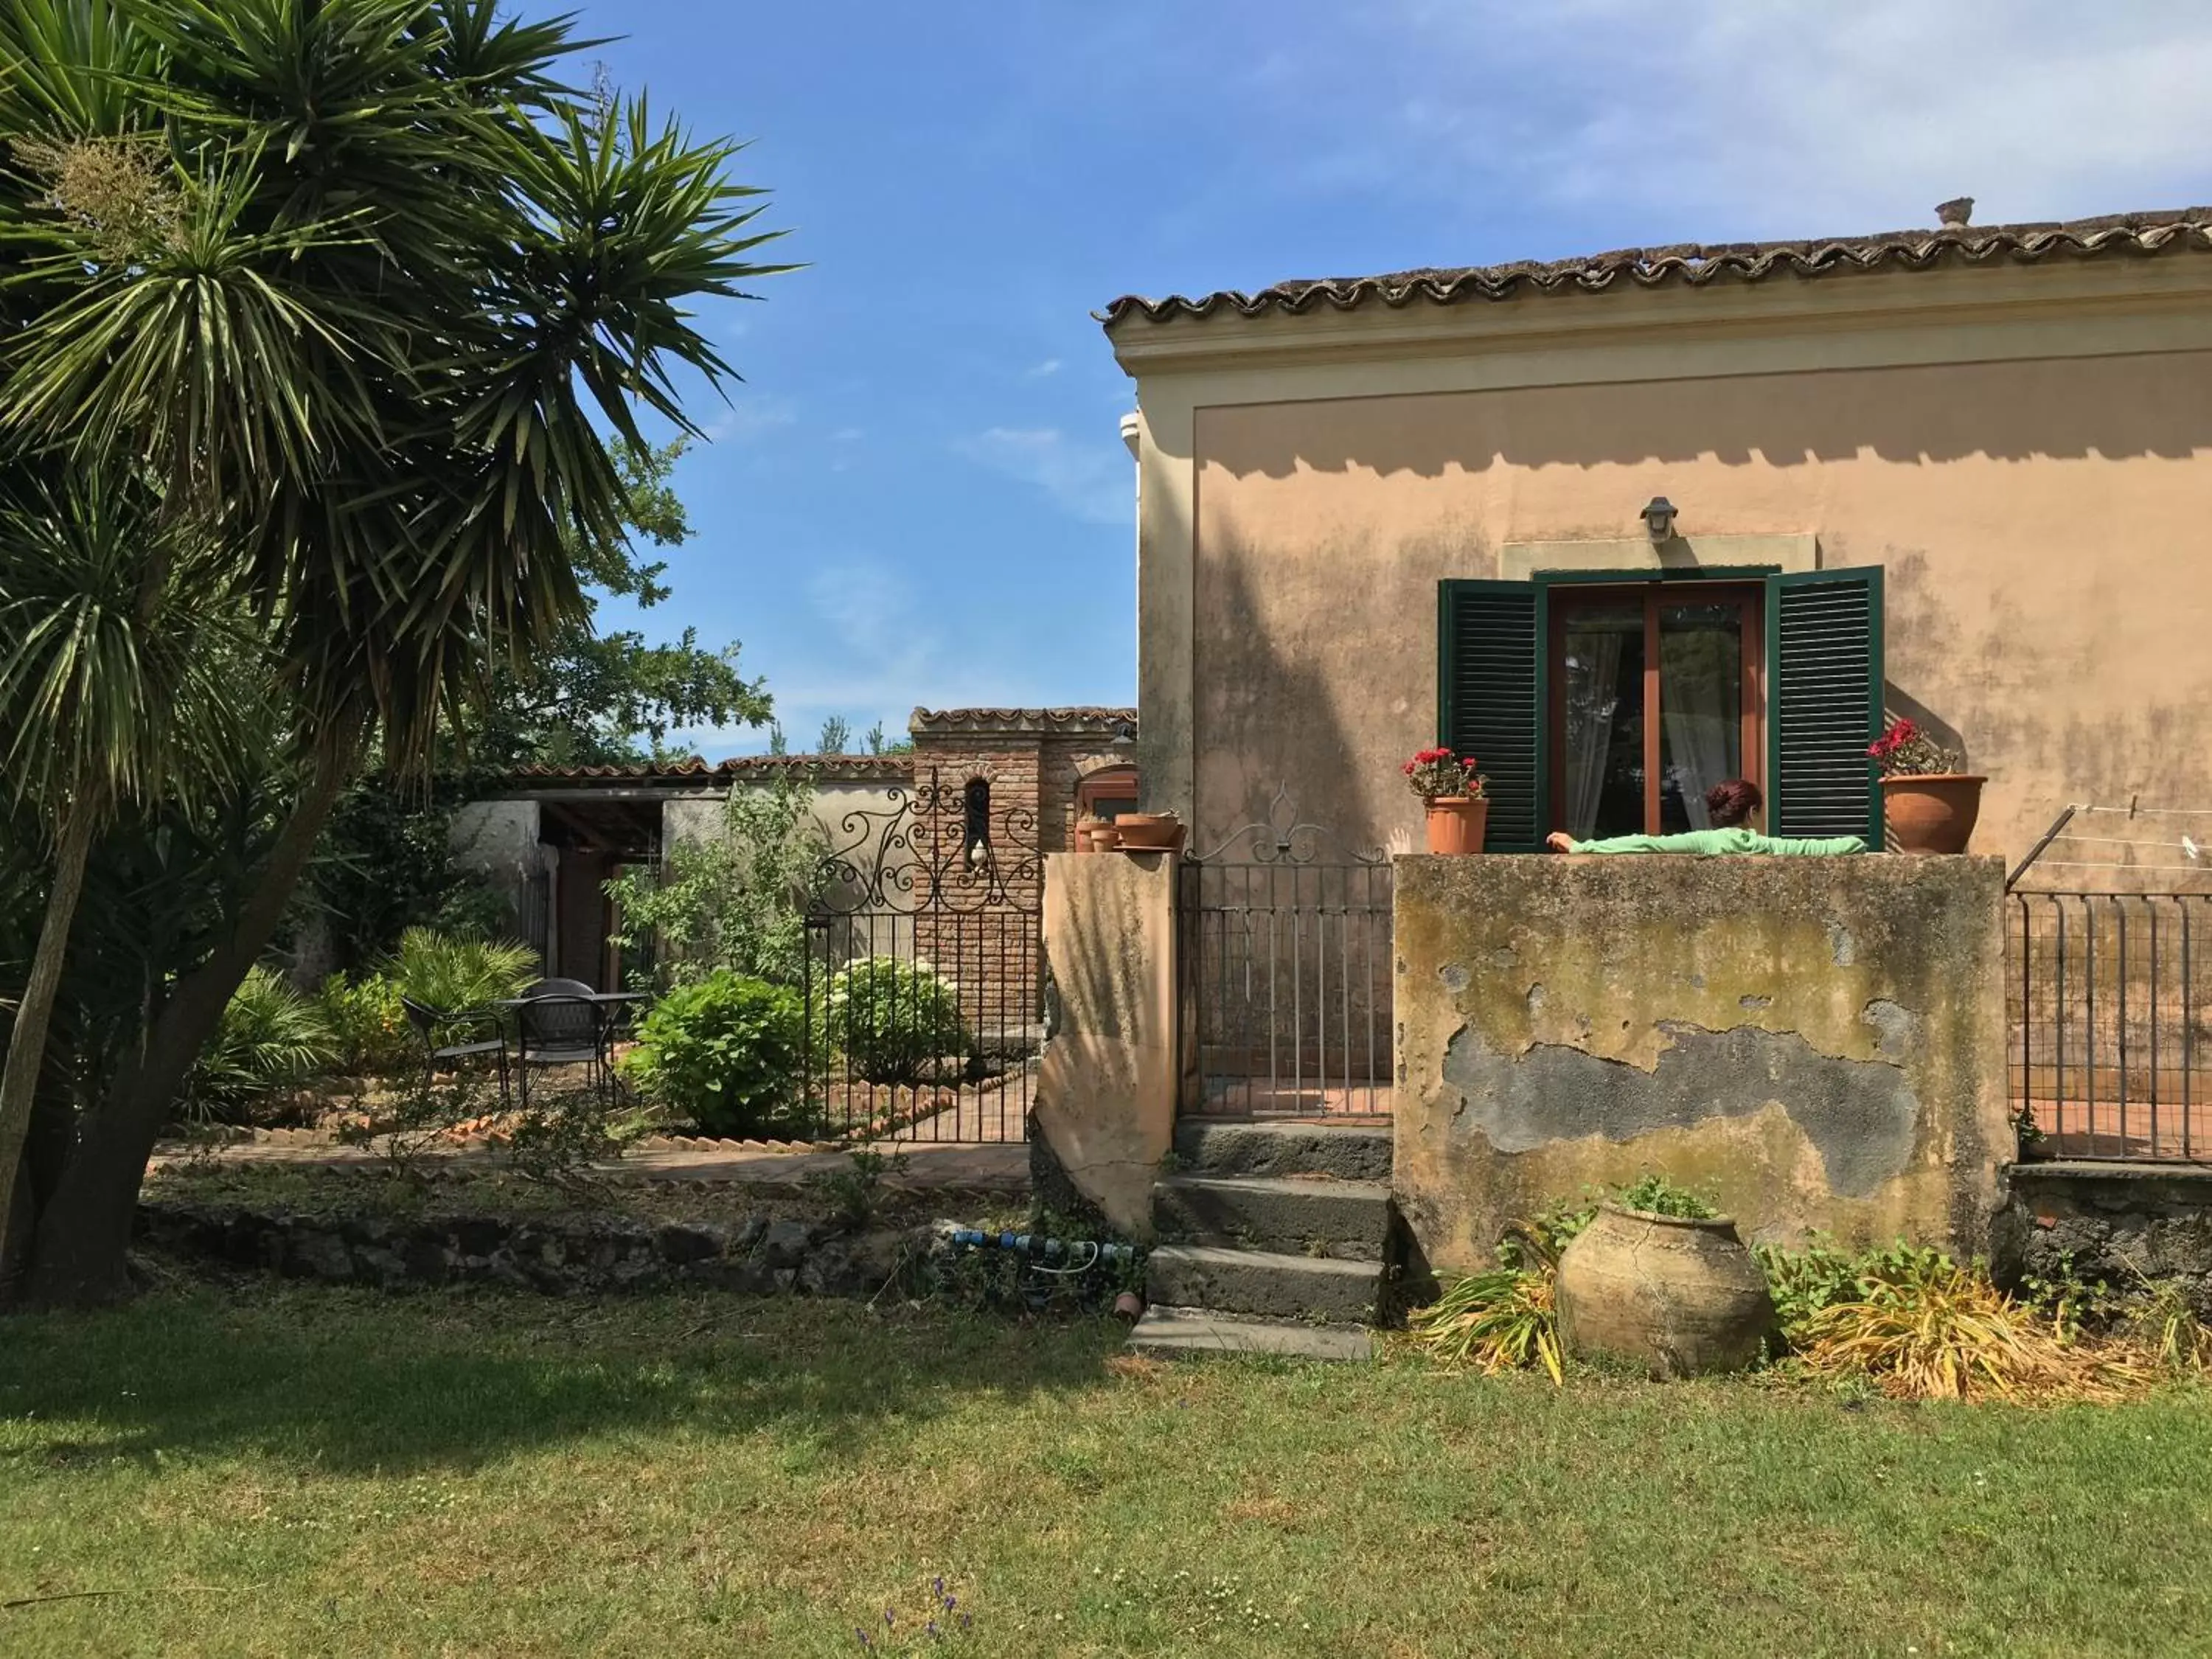 Property building, Garden in Bed and Breakfast Il Glicine